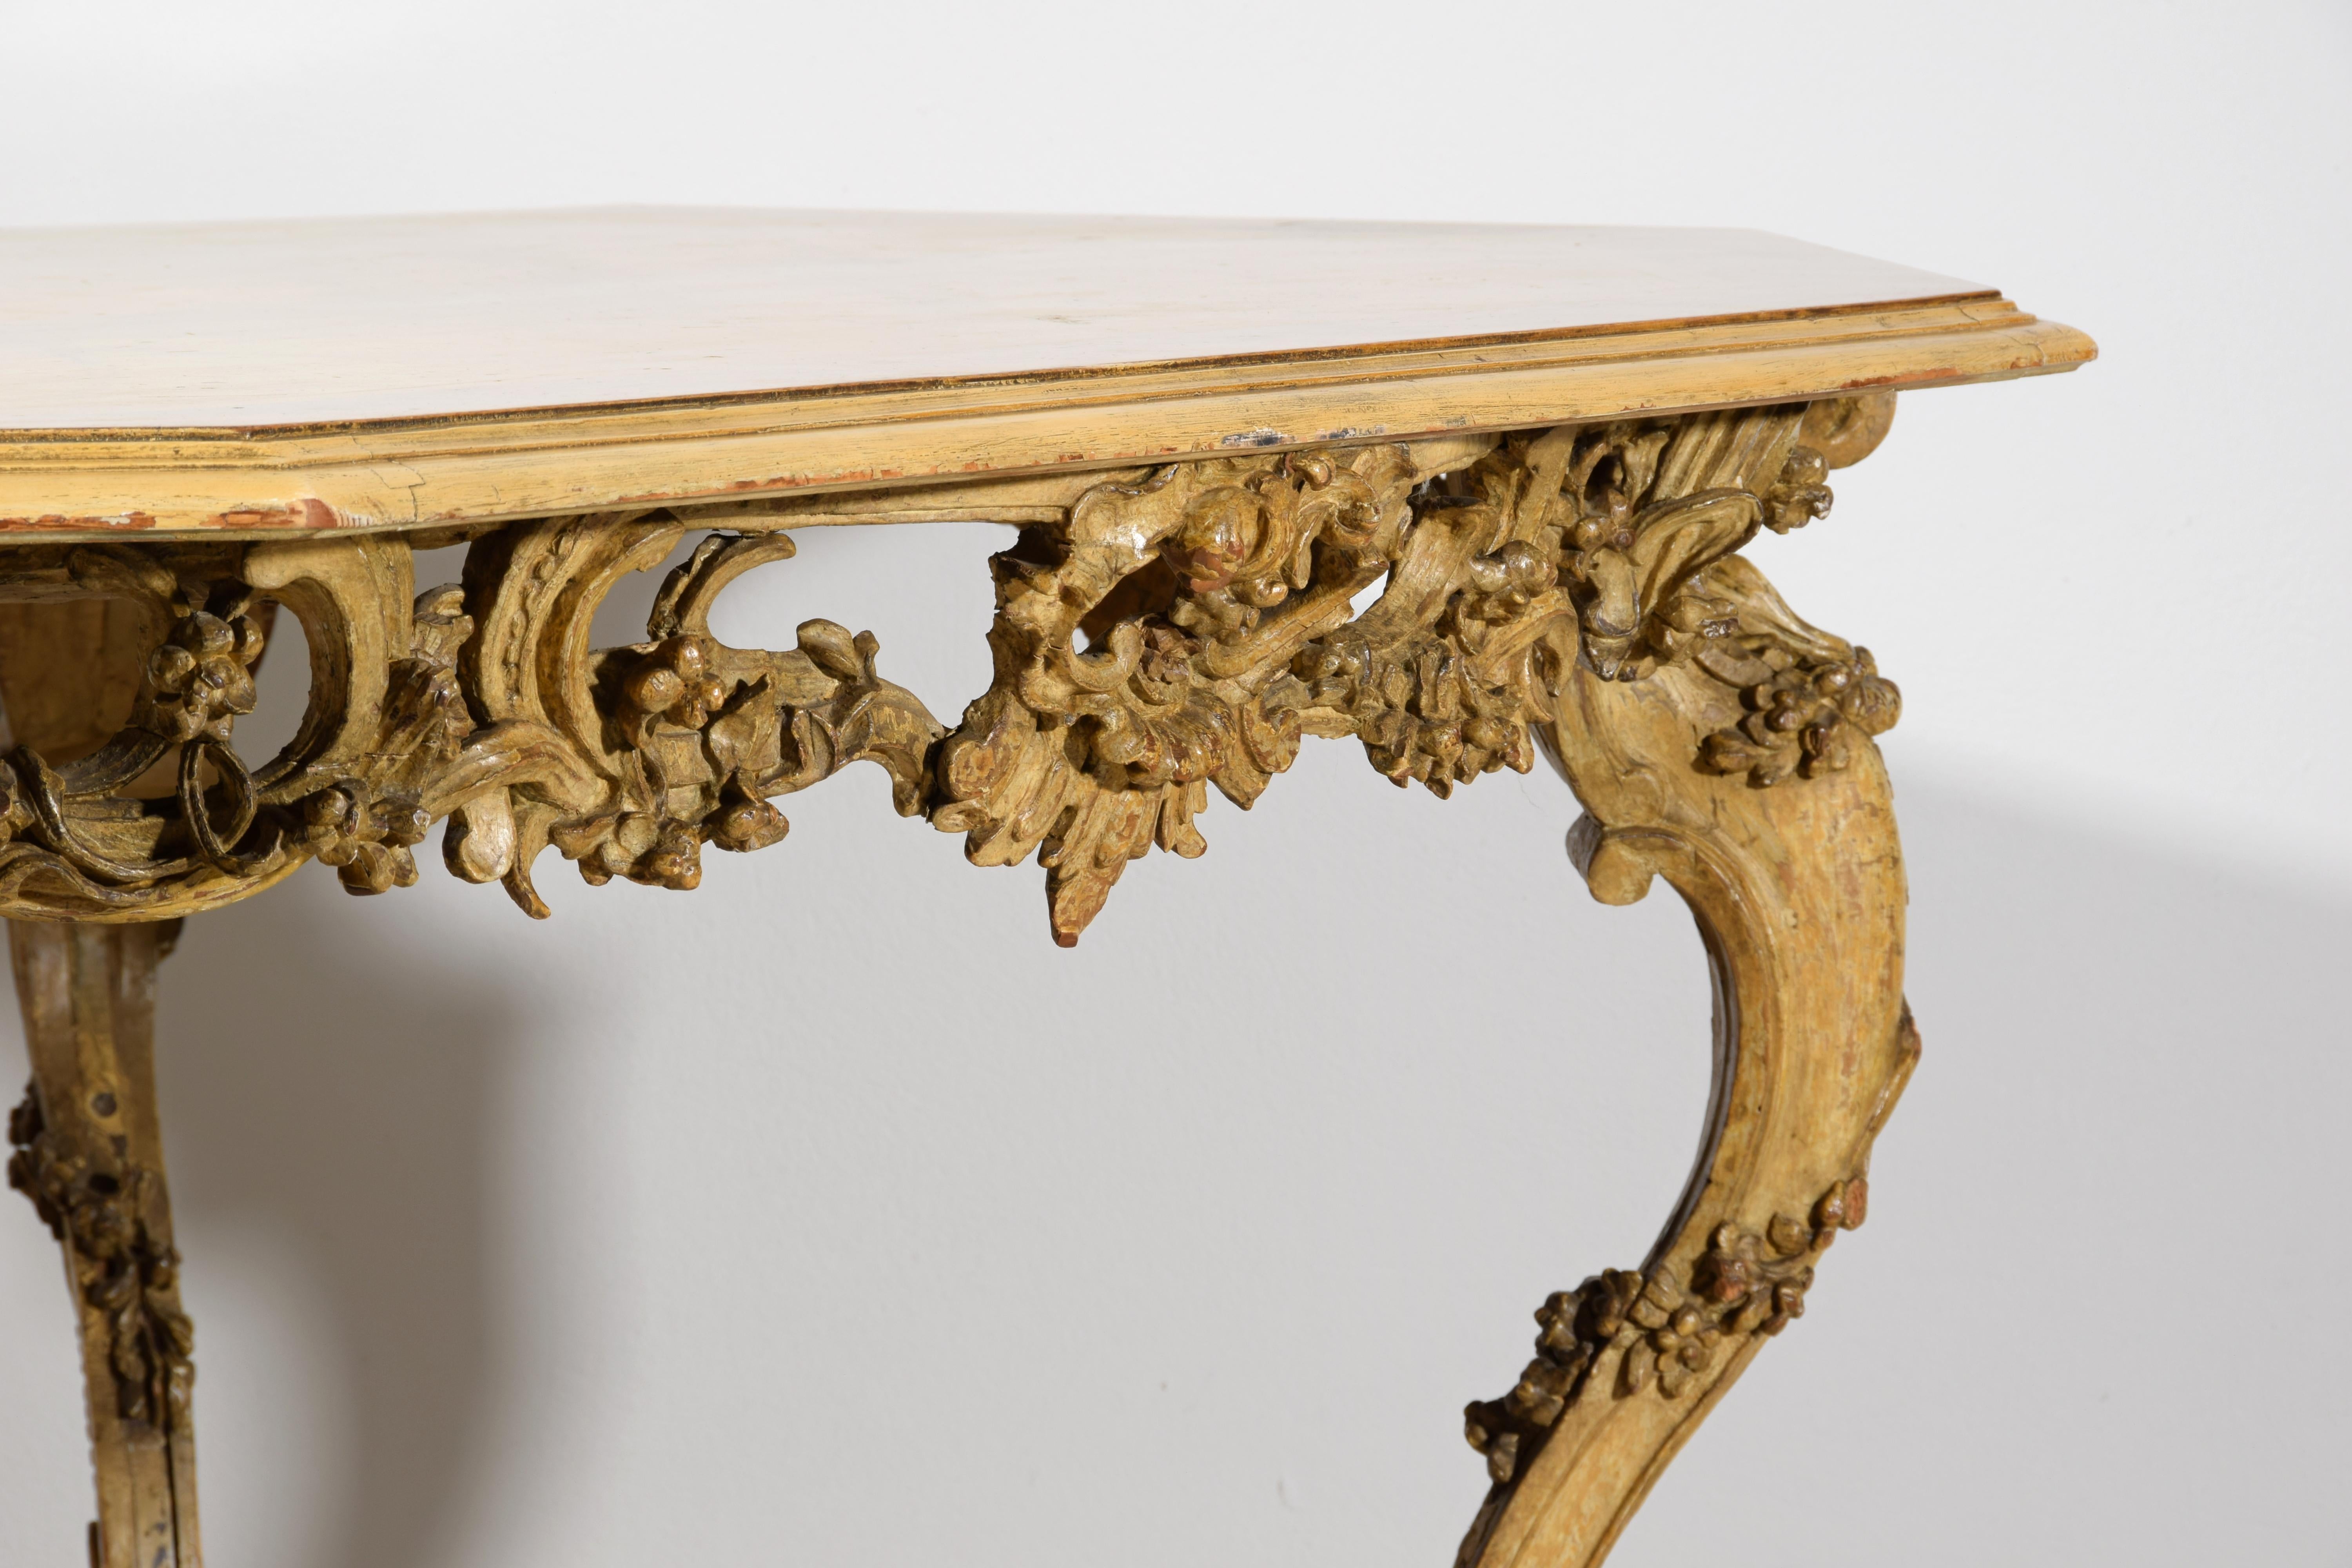 Italian Baroque Carved Gilt and Lacquered Wood Center Table, 18th Century For Sale 14